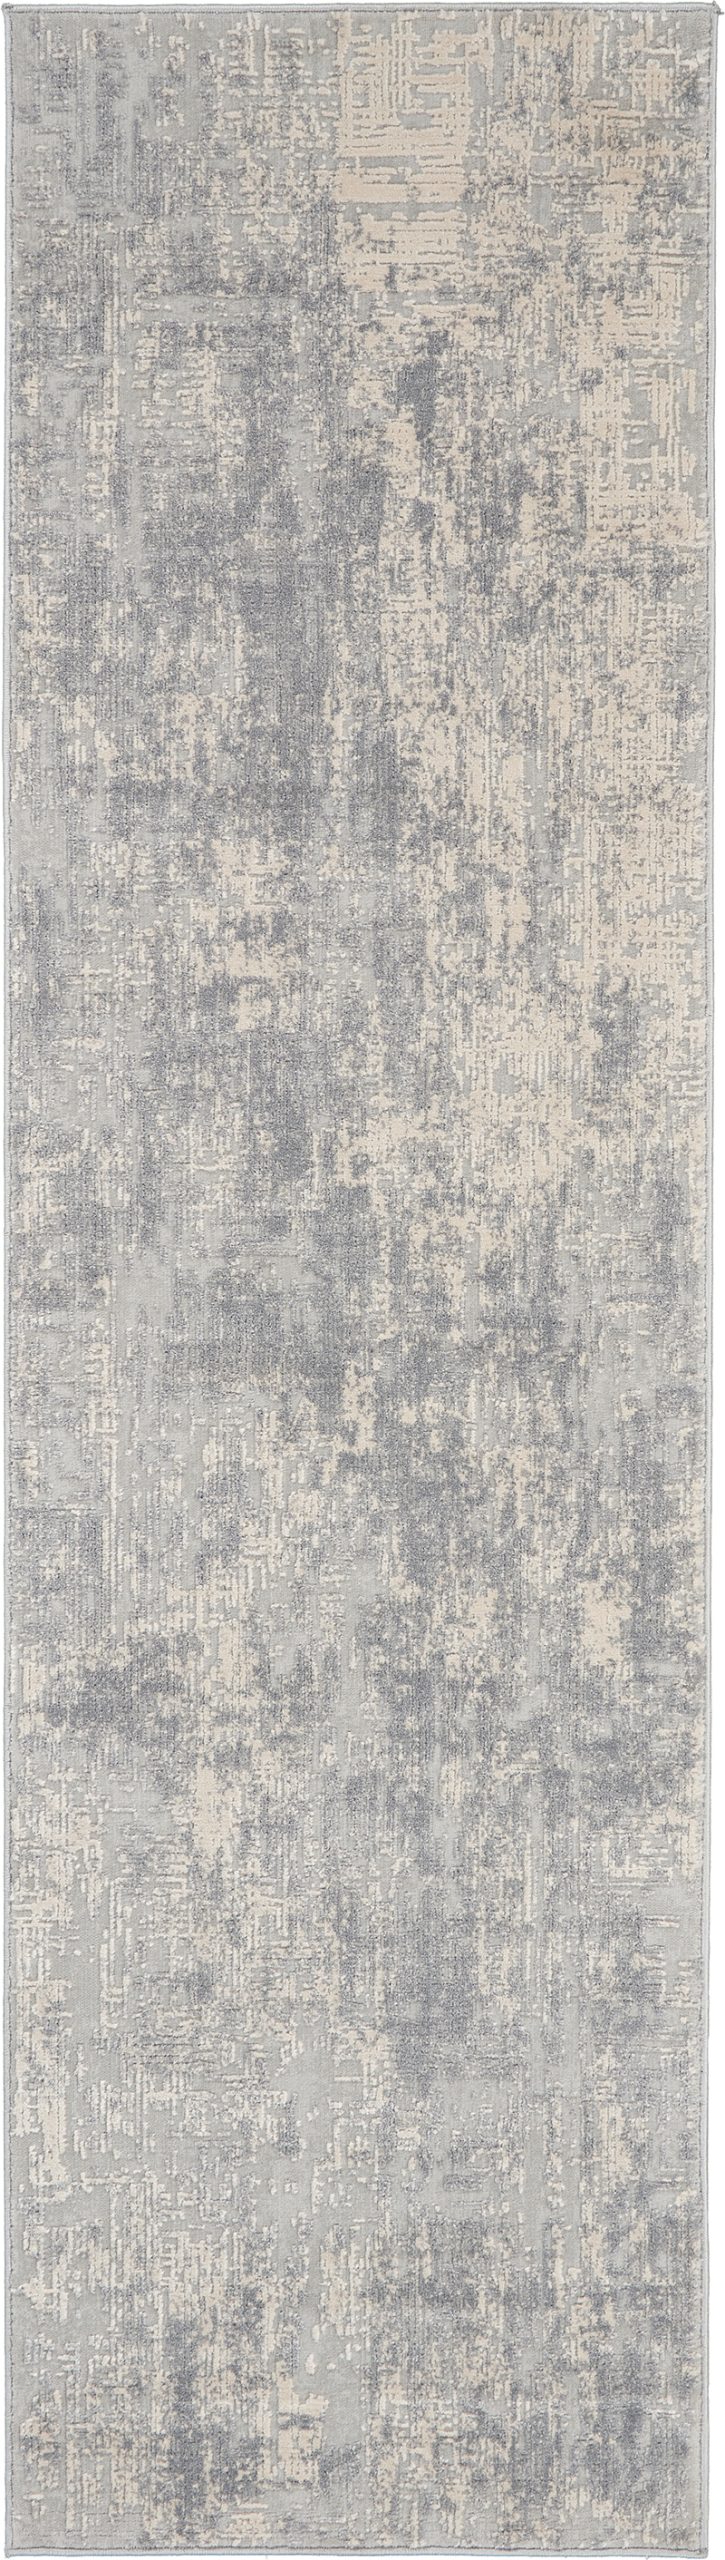 Nourison Rugs - Rustic Textures Runner RUS01 Rug in Ivory / Silver - 2.3m x 0.66m